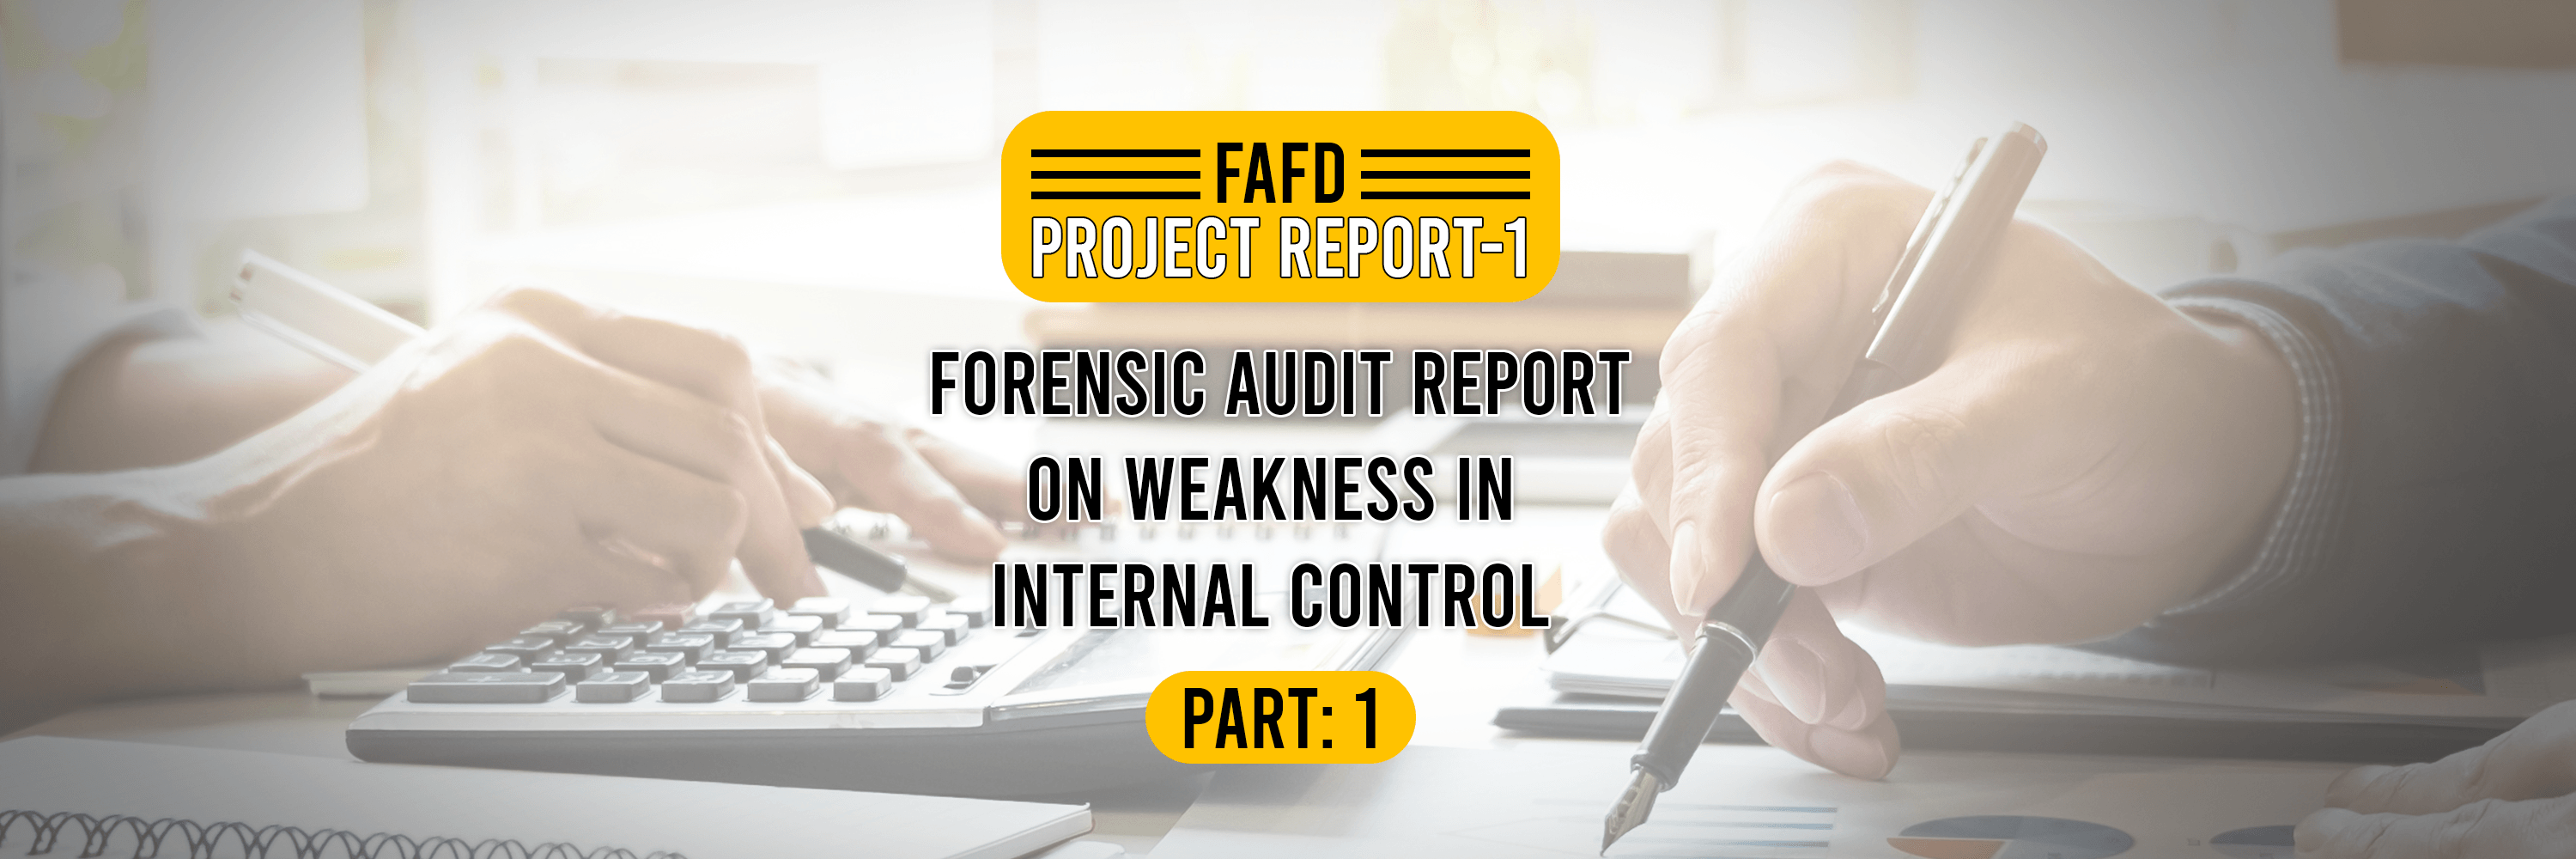 Forensic Audit Report on Weakness in Internal Control FAFD Project 1